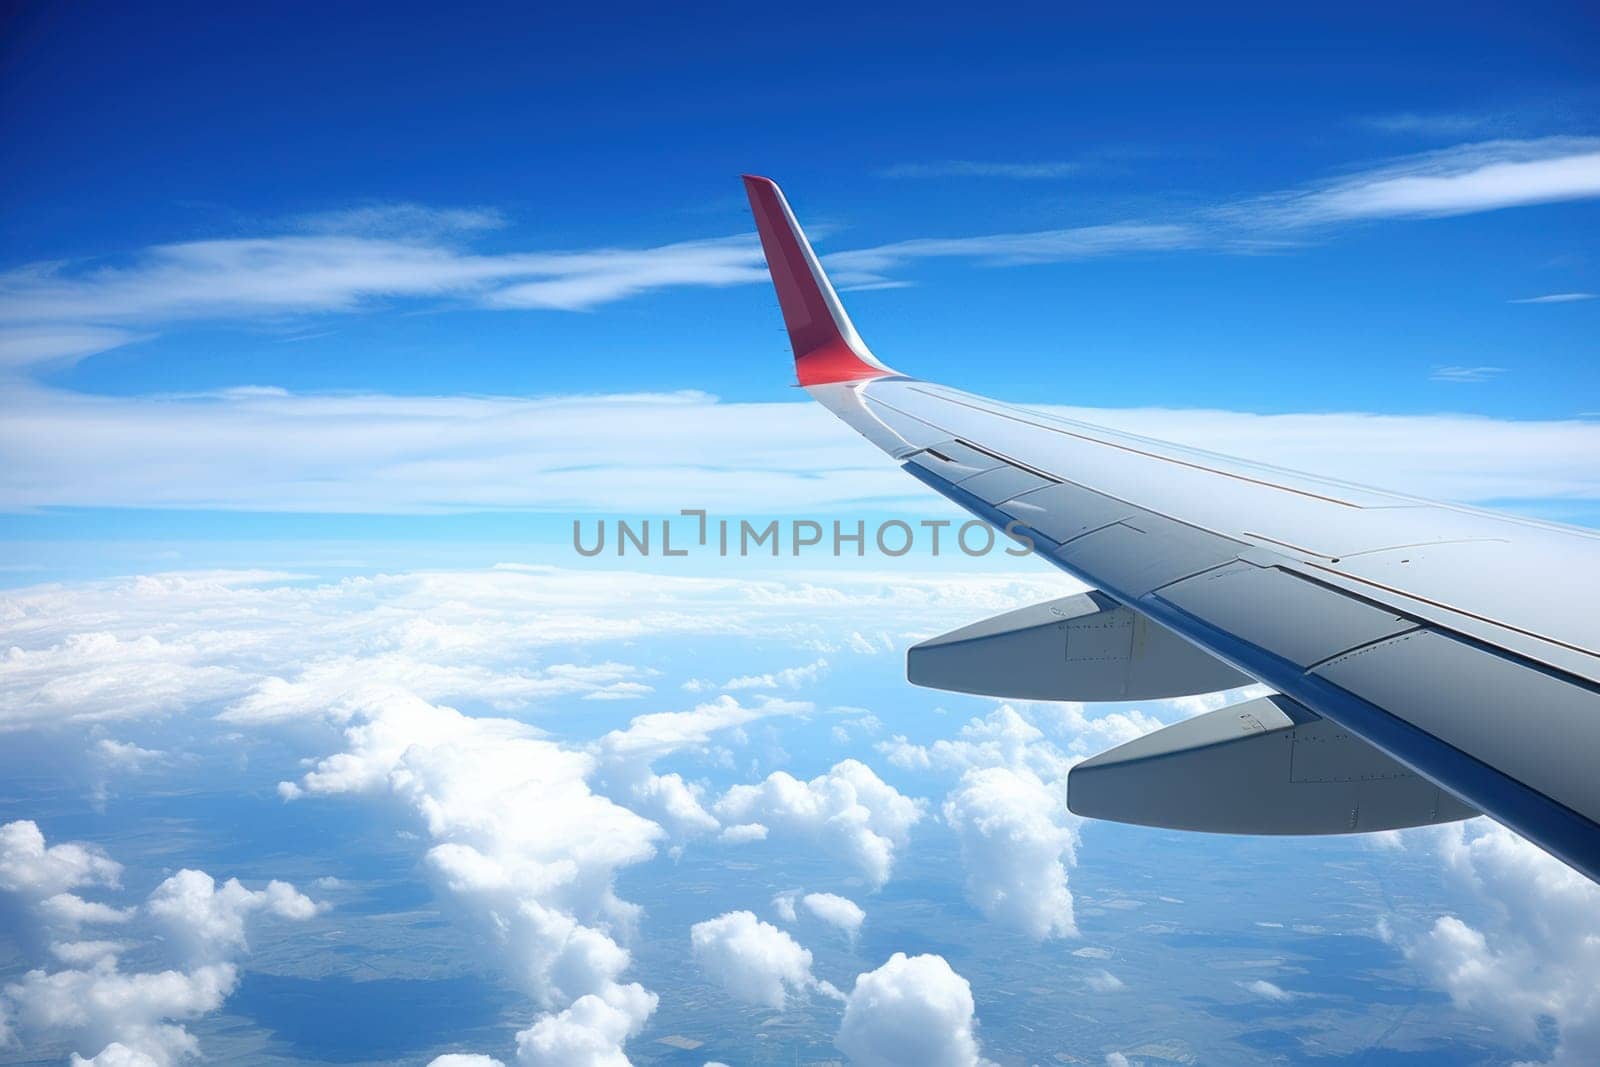 Photo View from the window of an airplane wing while flying over a blue sky.